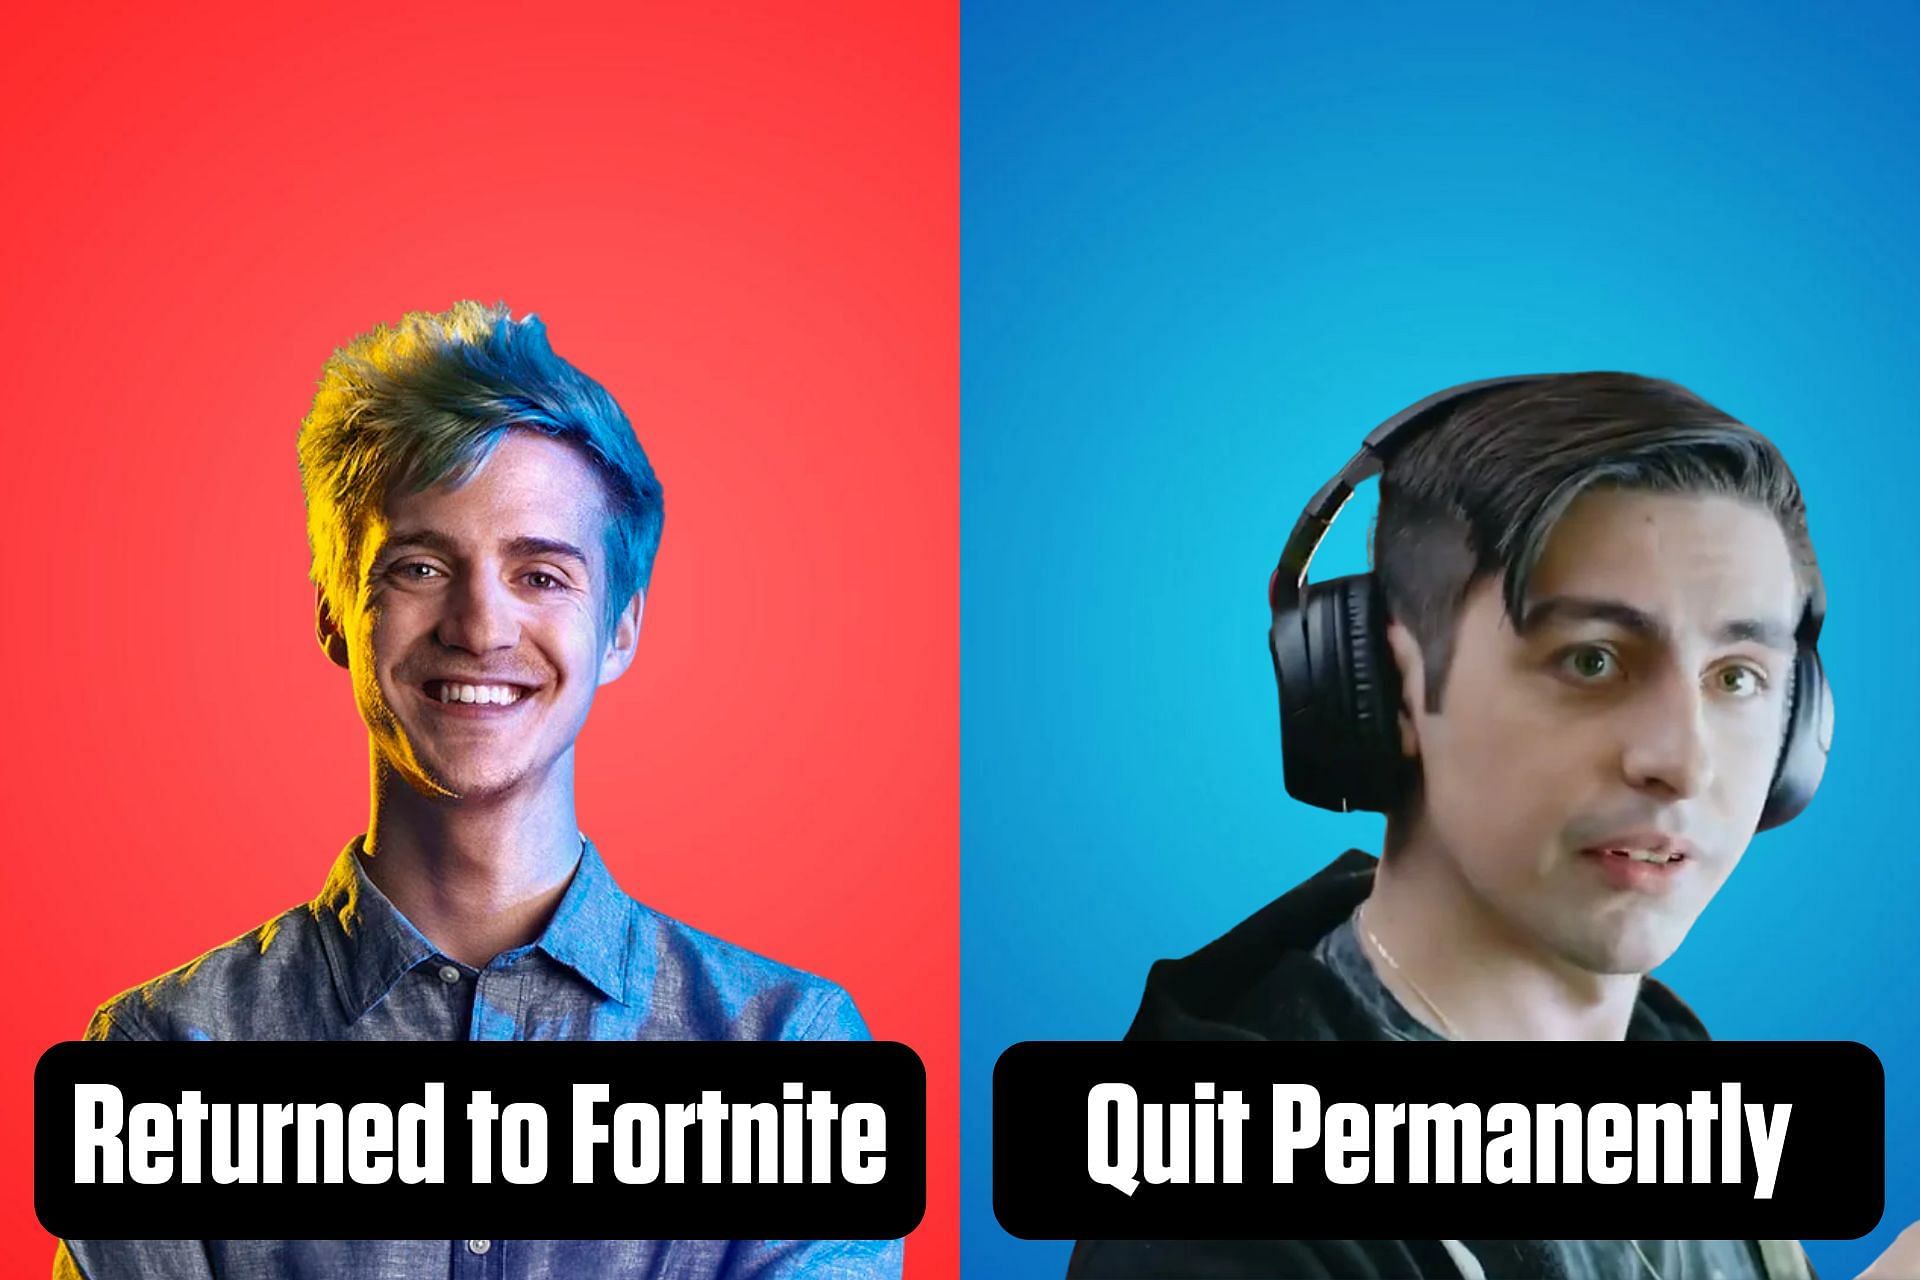 Shroud was one of most popular streamers not to return to Fortnite while Ninja came back after an exile (Image via Sportskeeda)